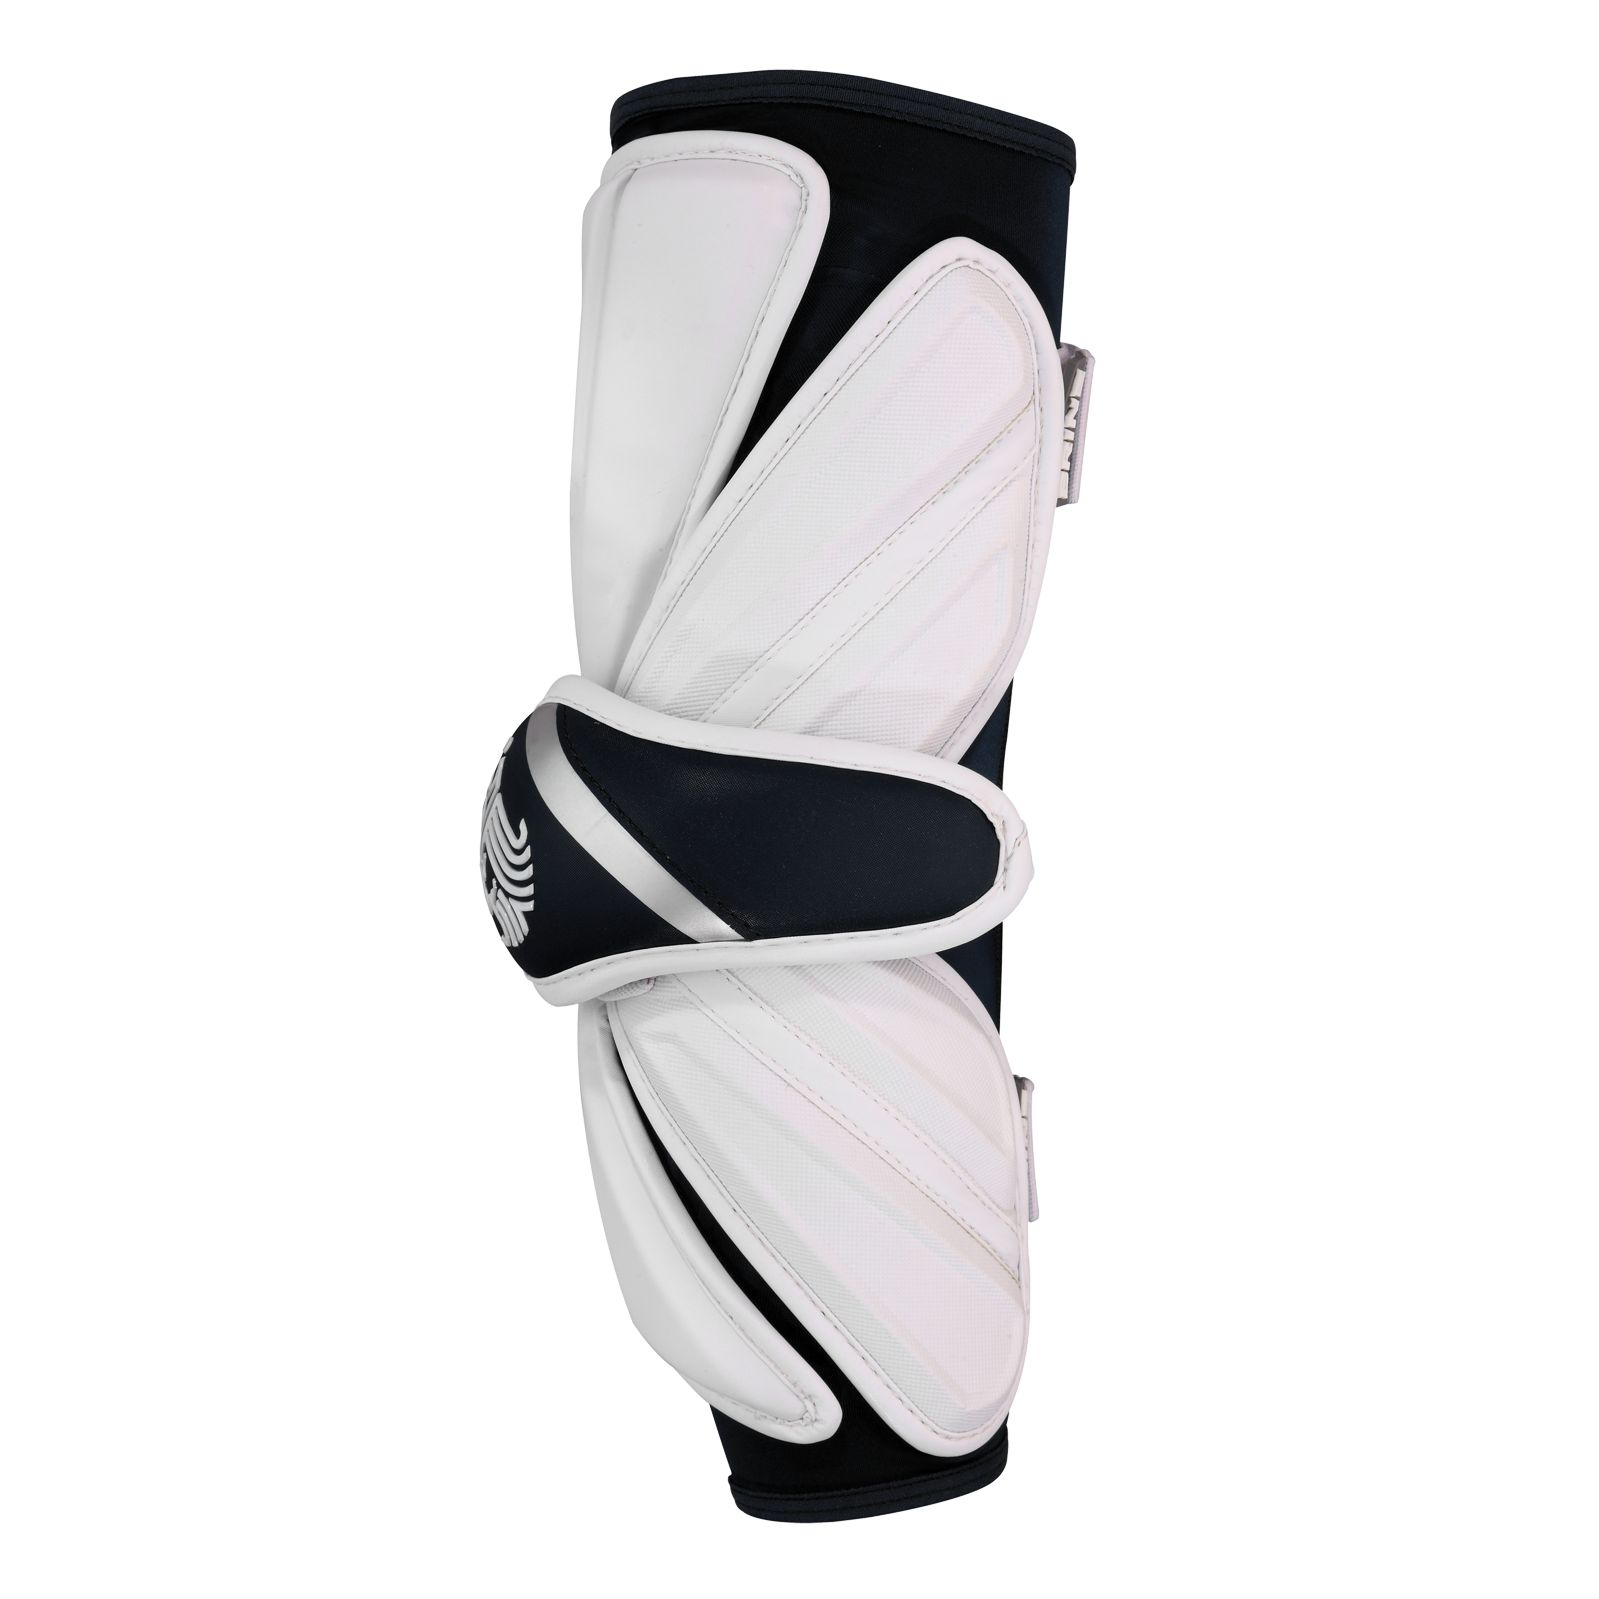 King V Arm Guard, Black with White image number 2